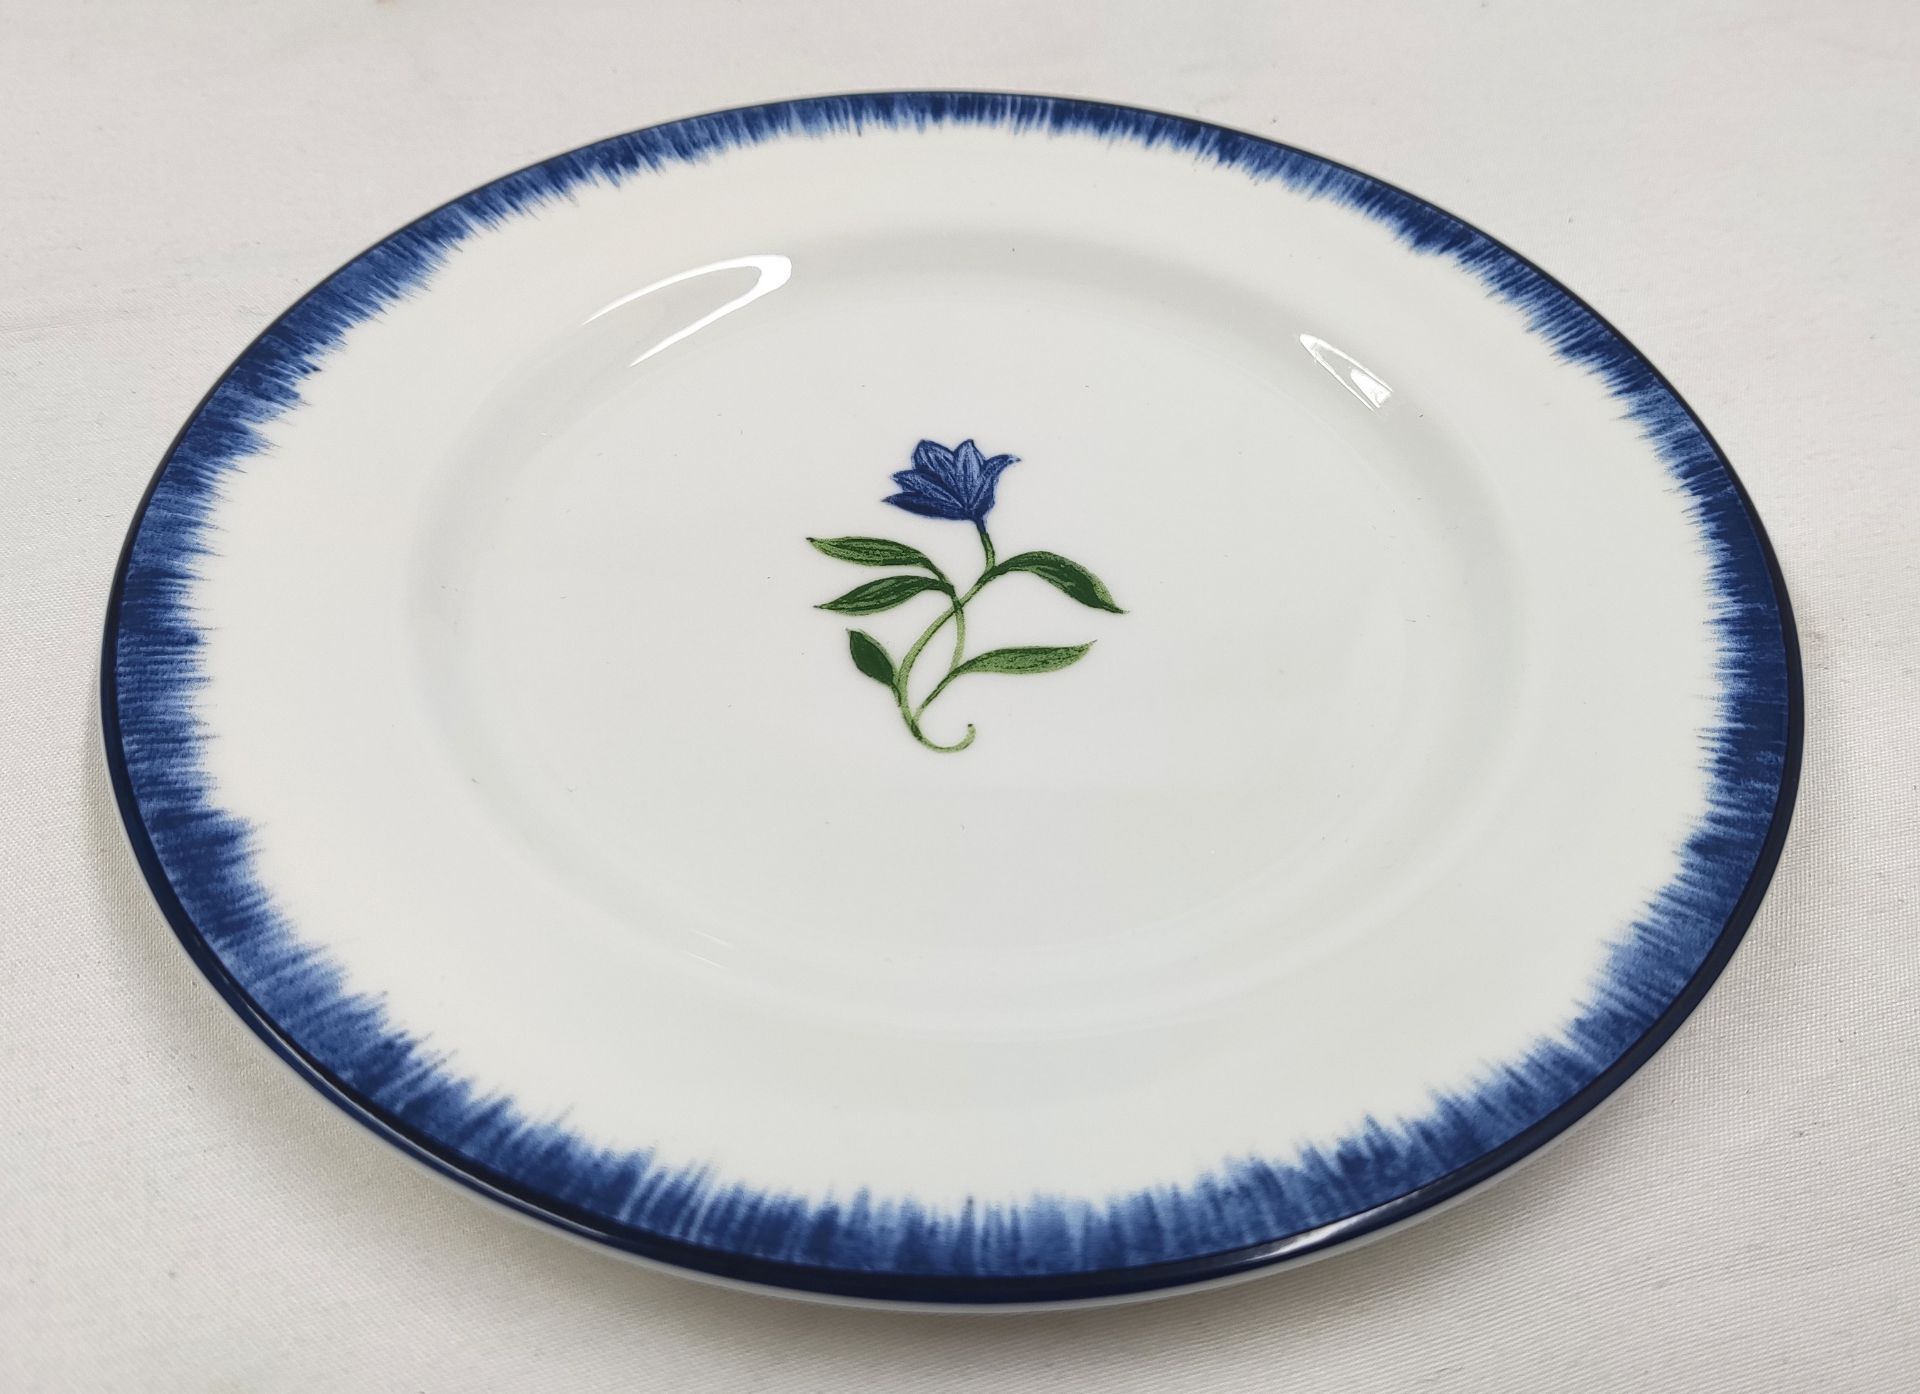 1 x HALCYON DAYS Nina Campbell Marguerite 6" Side Plate - New/Boxed - Original RRP £59.00 - Image 2 of 10